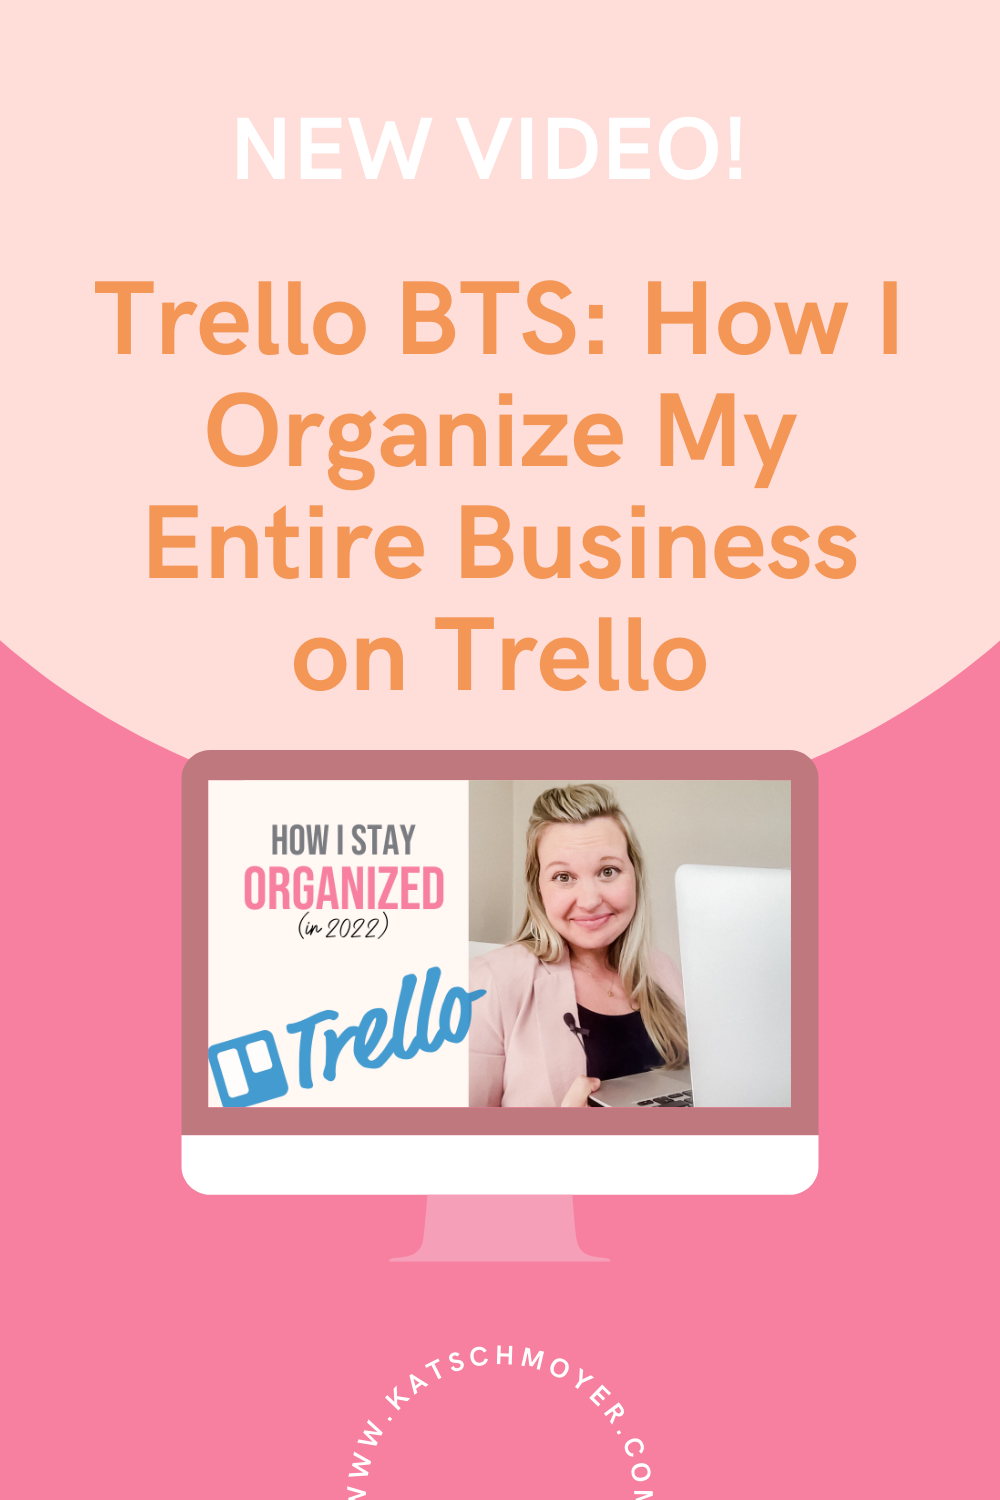 How I Organize My Entire Business on Trello